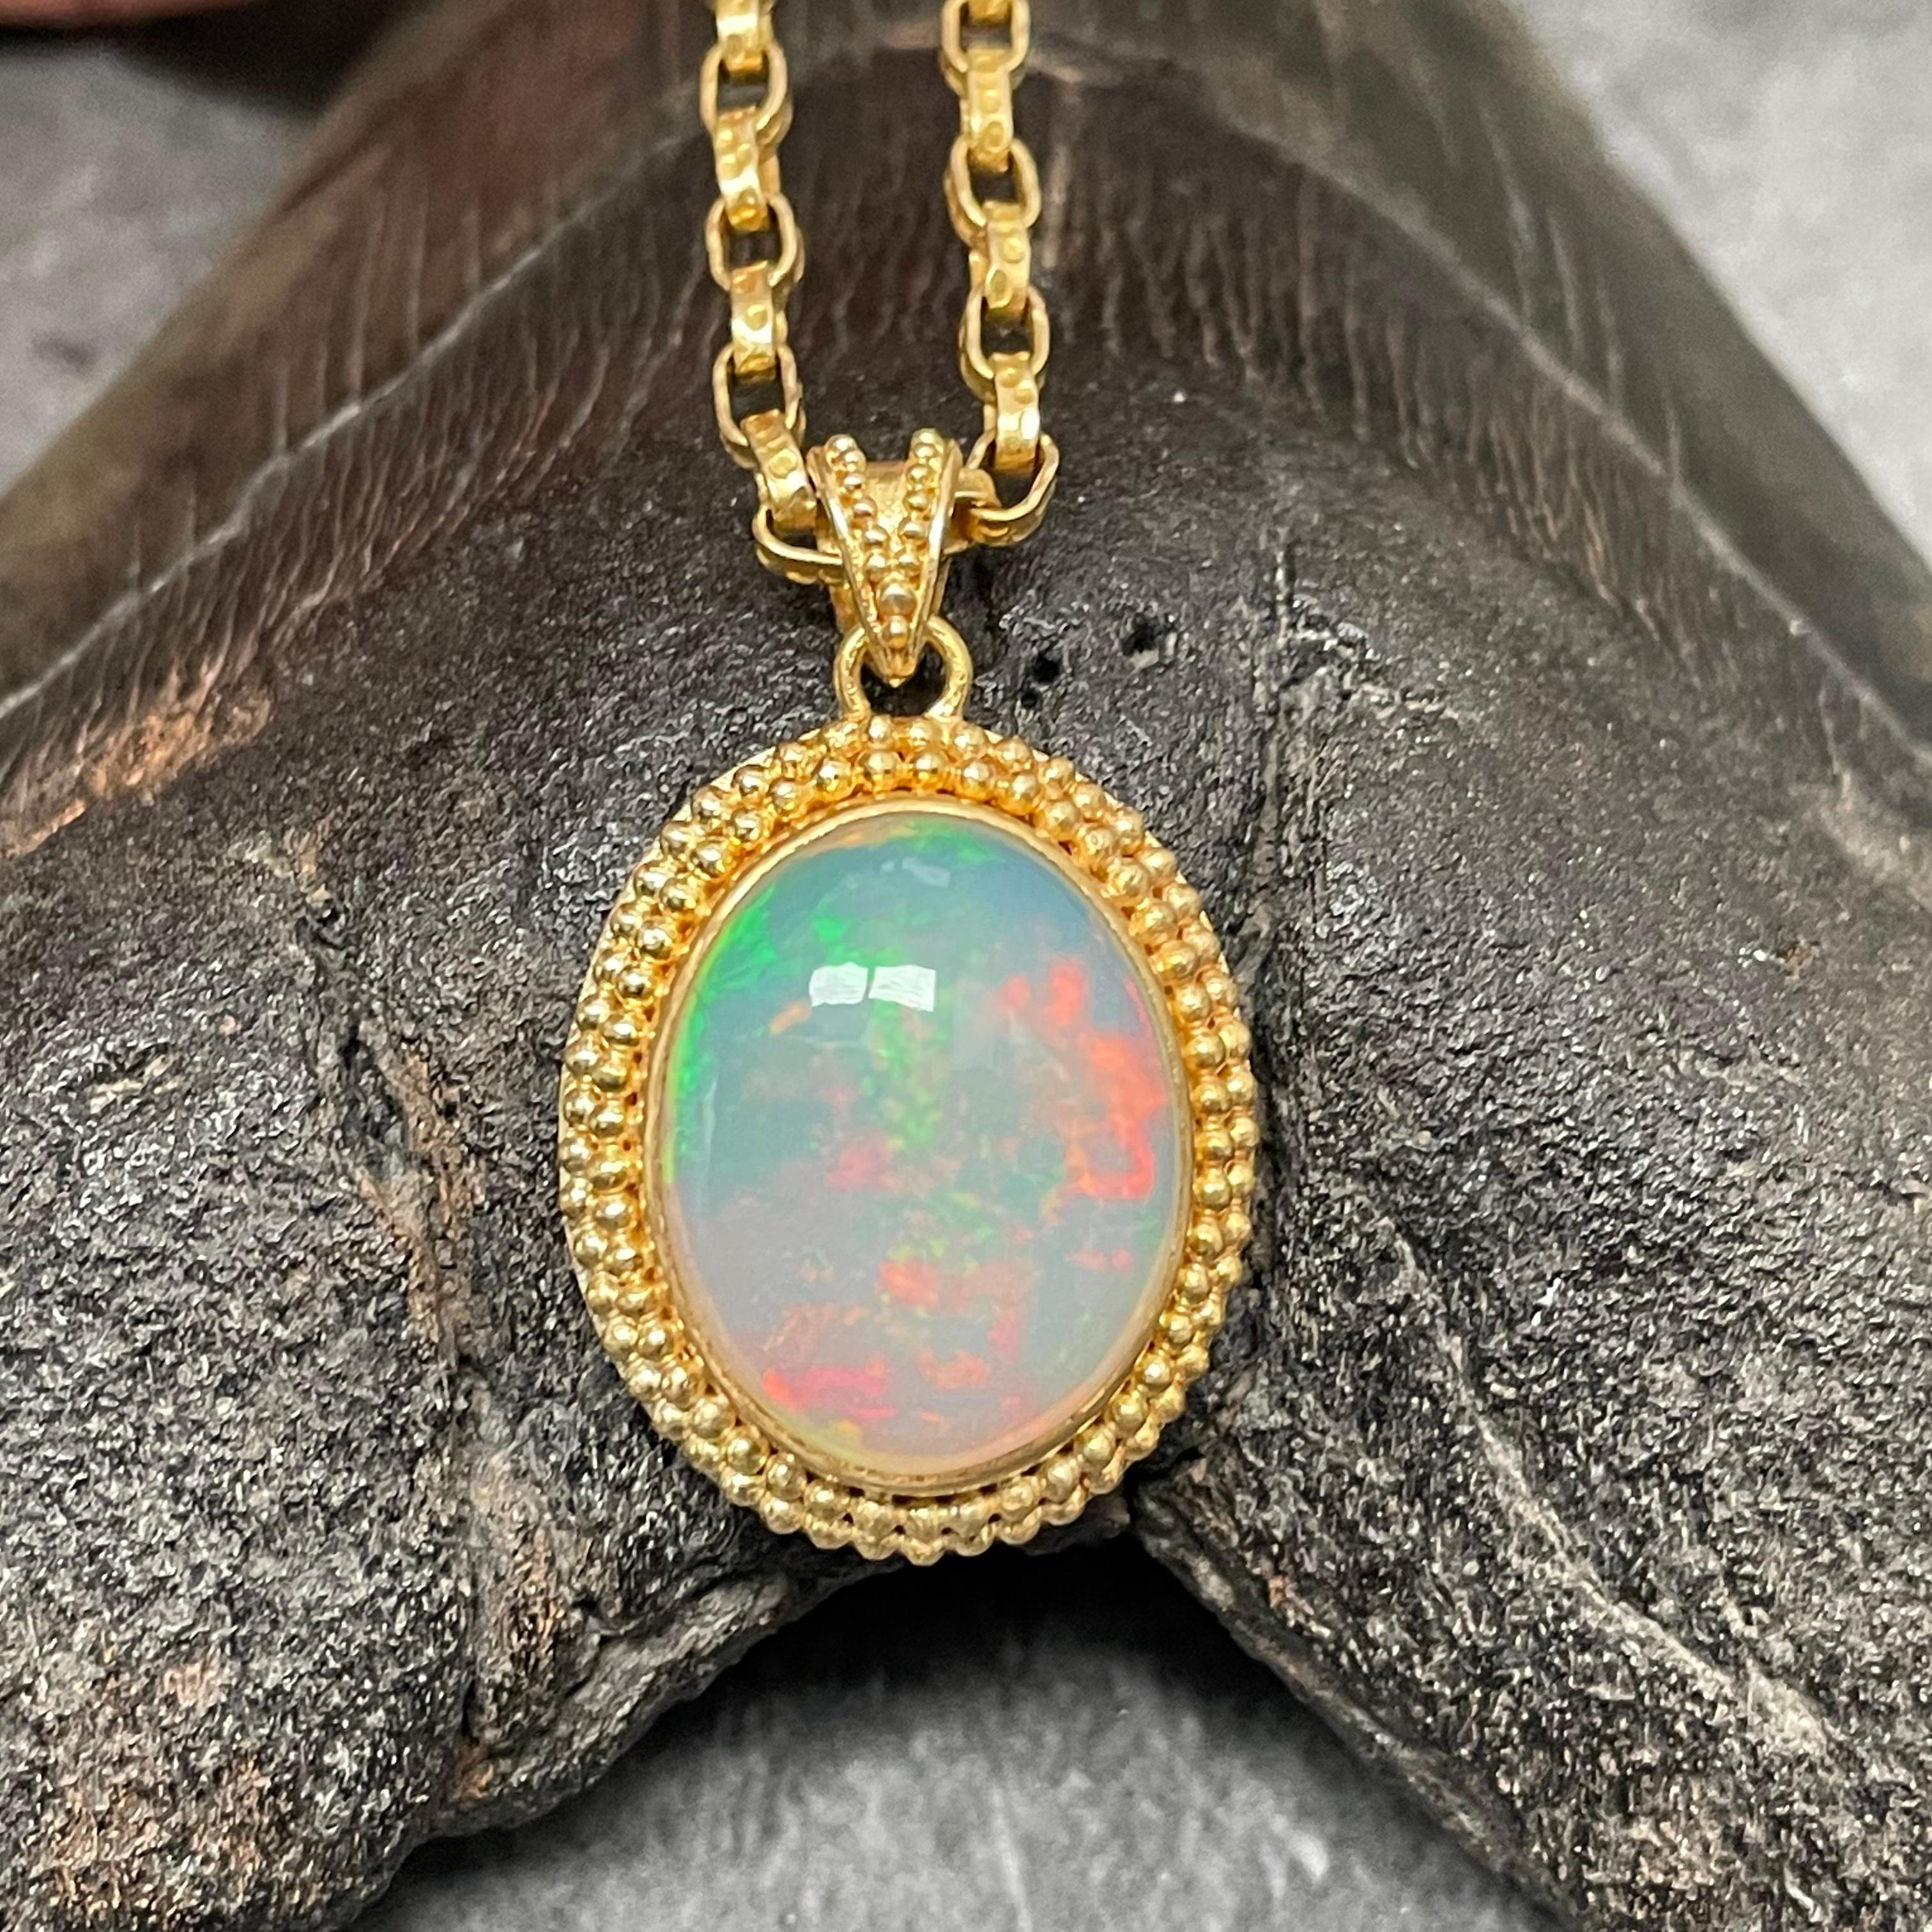 A flashing oval 15 x 18 mm cabochon of high grade Ethiopian Welo opal is surrounded by double stacked rows of 22K granulation with a similarly ornamented bail in this classic handmade creation.  Shades of green, red and yellow.   This piece is